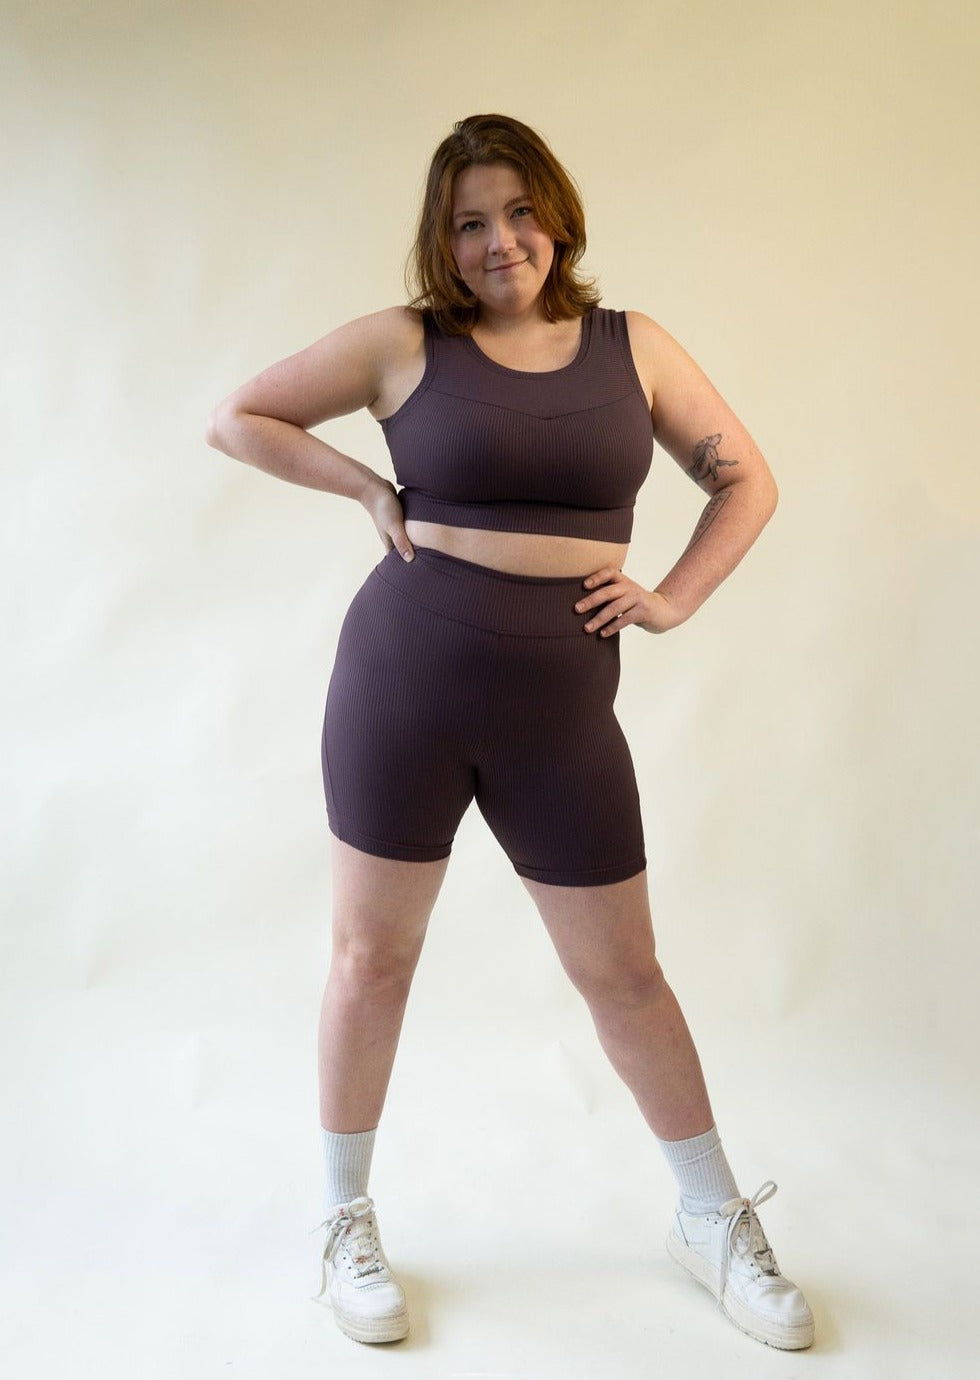 Milton Menasco | Bronco Ribbed Bralette Top, Street_and_Saddle, local_plus_size_inclusive_ethical